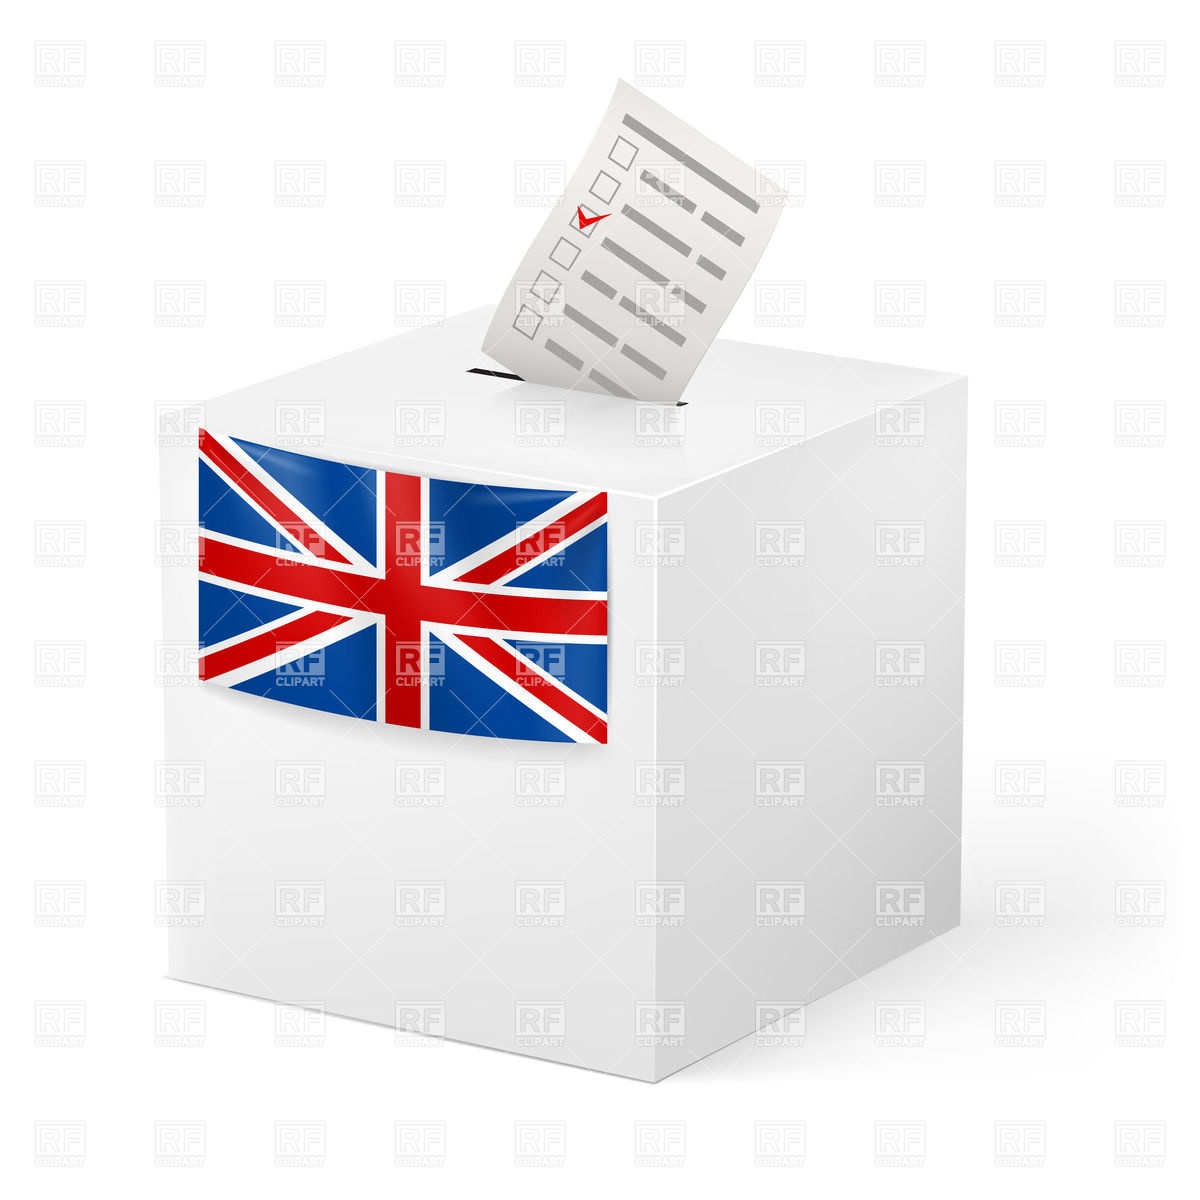 Voting Paper And Ballot Box   Election In Great Britain Download